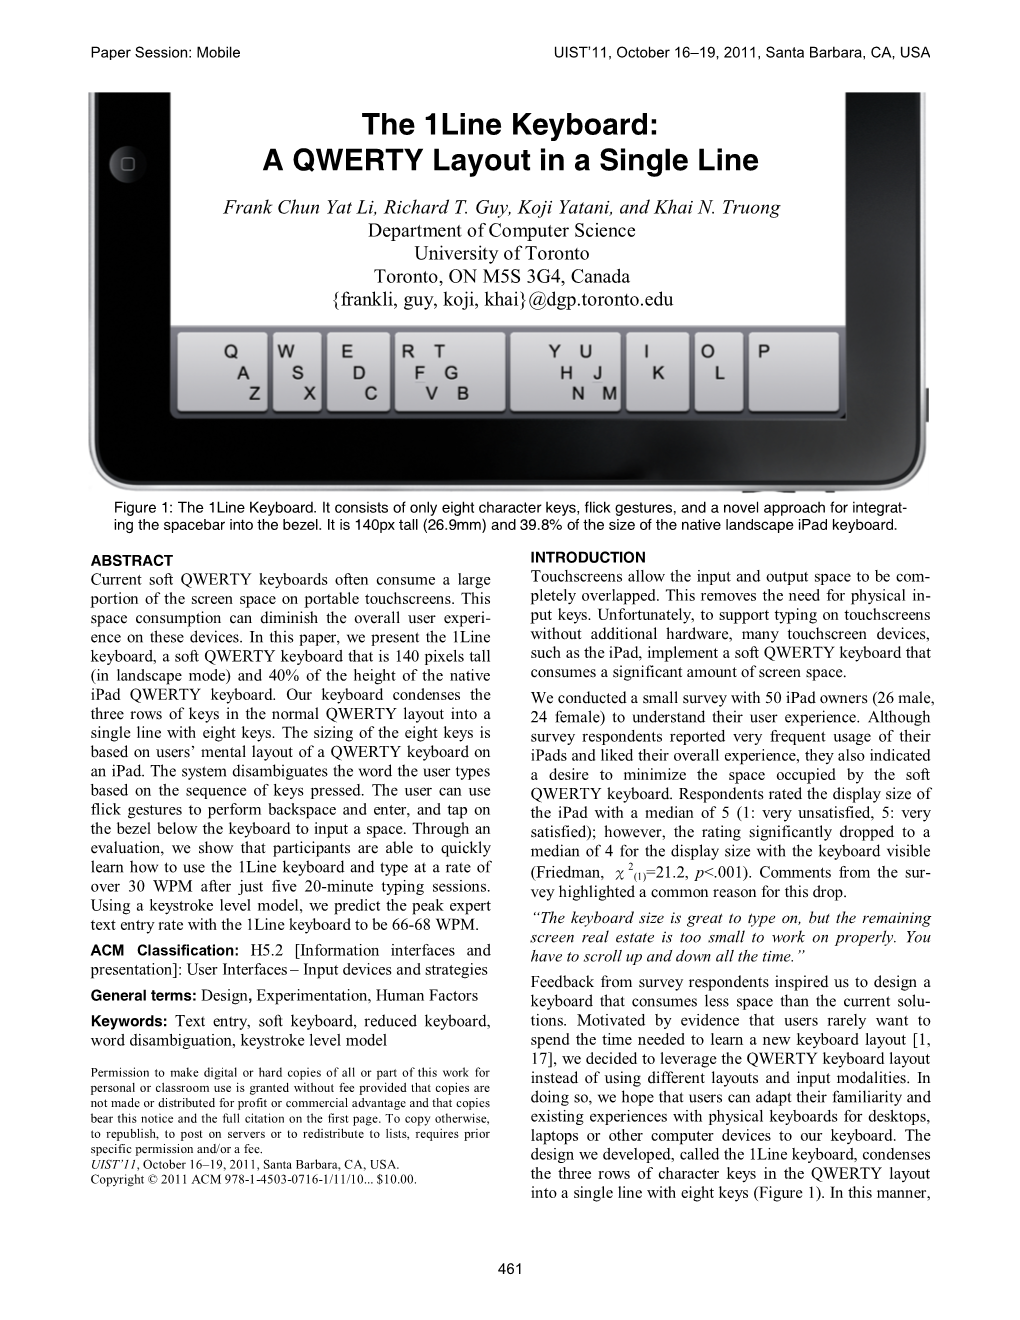 The 1Line Keyboard: a QWERTY Layout in a Single Line